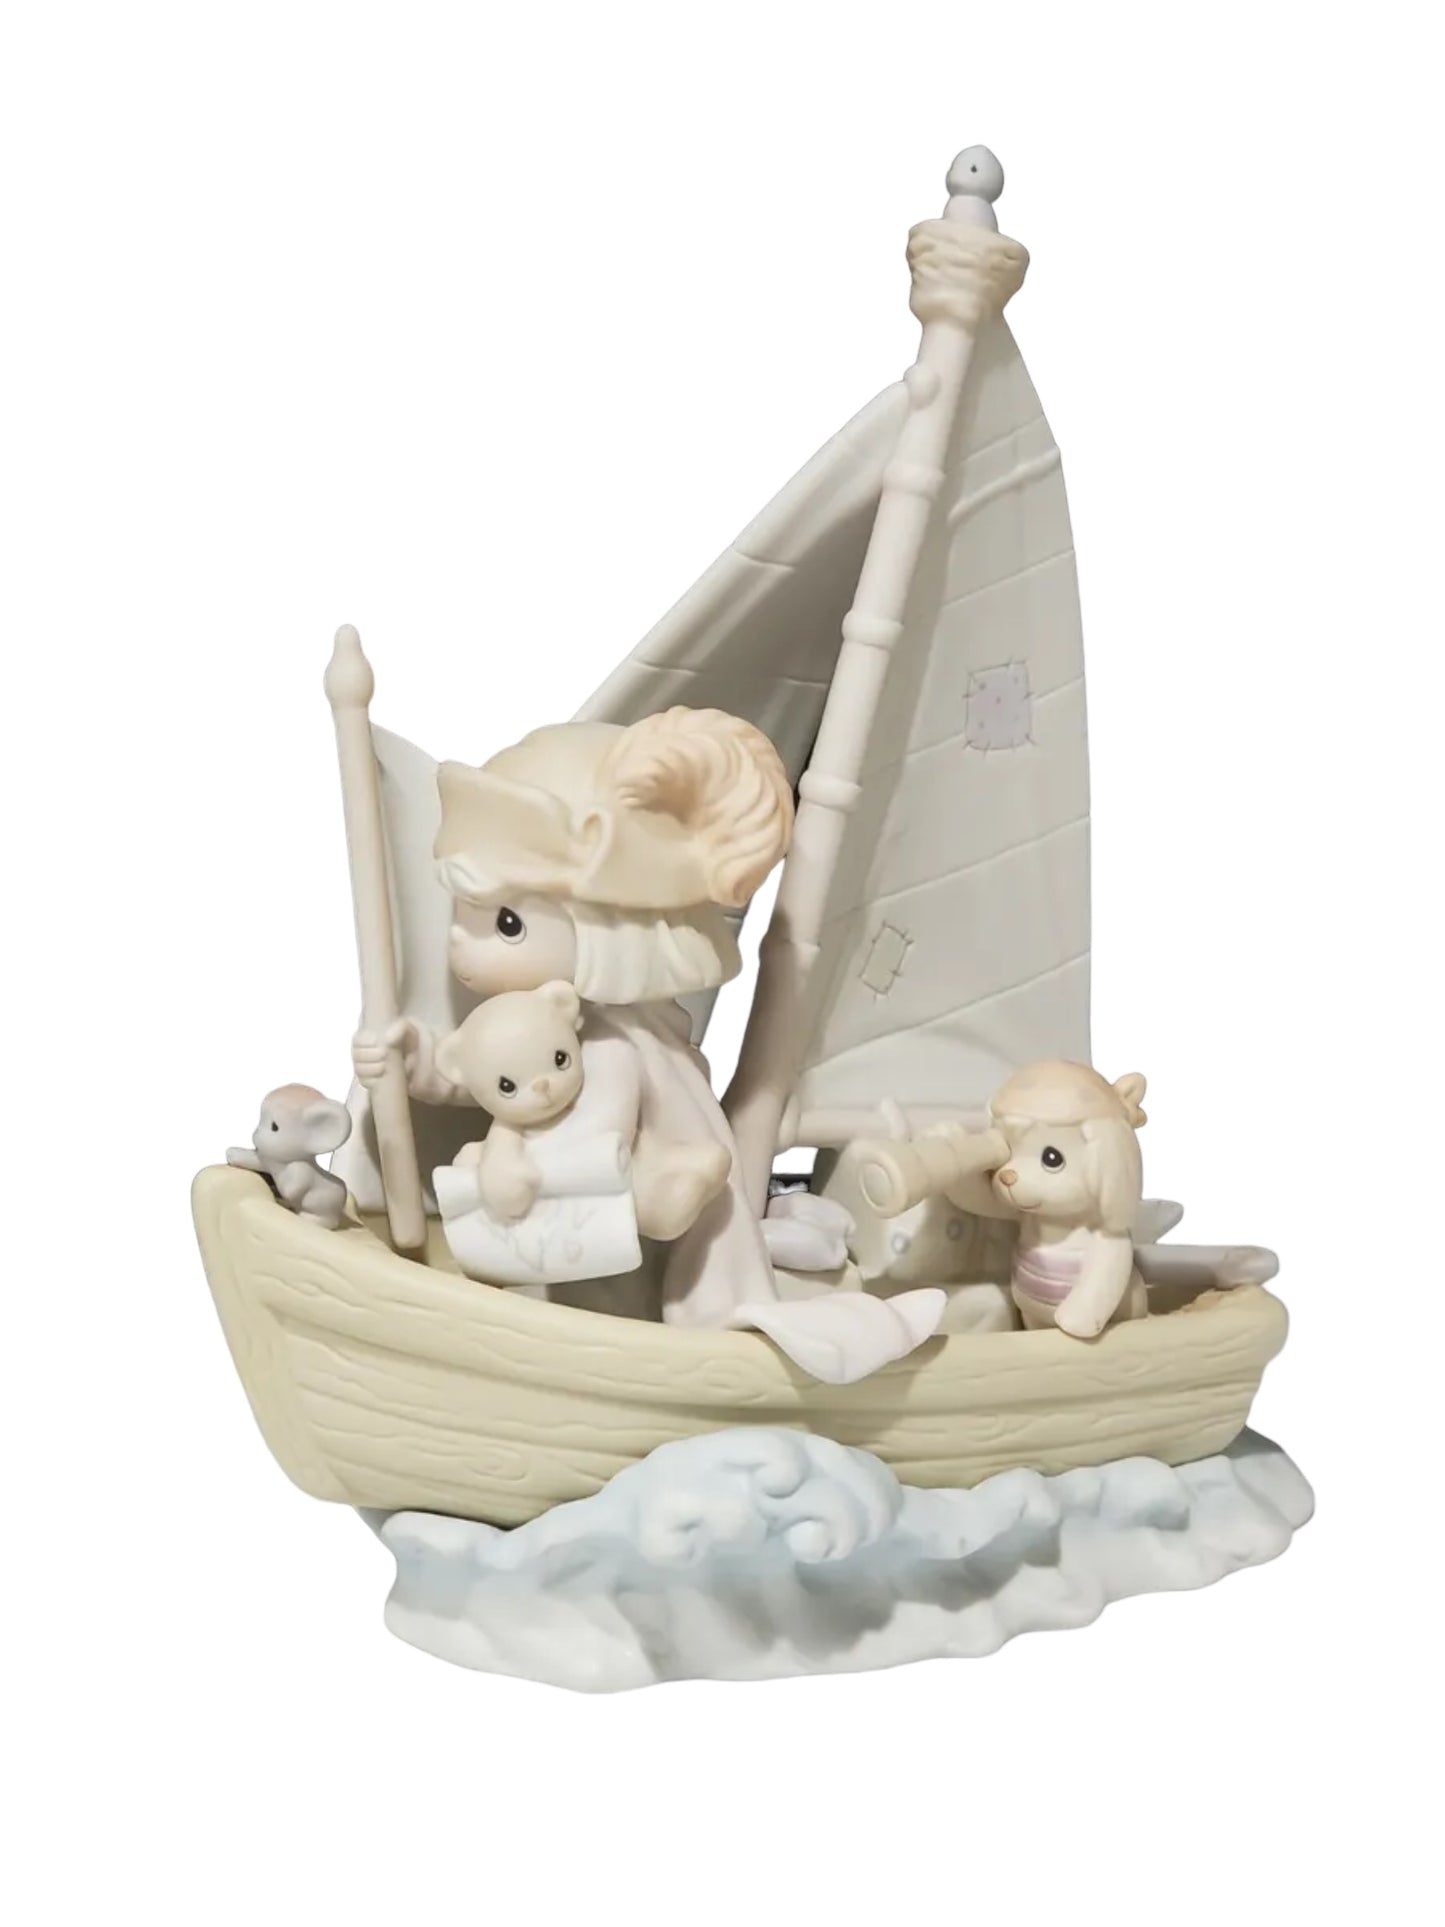 This Land Is Our Land - Precious Moments Figurine 527386